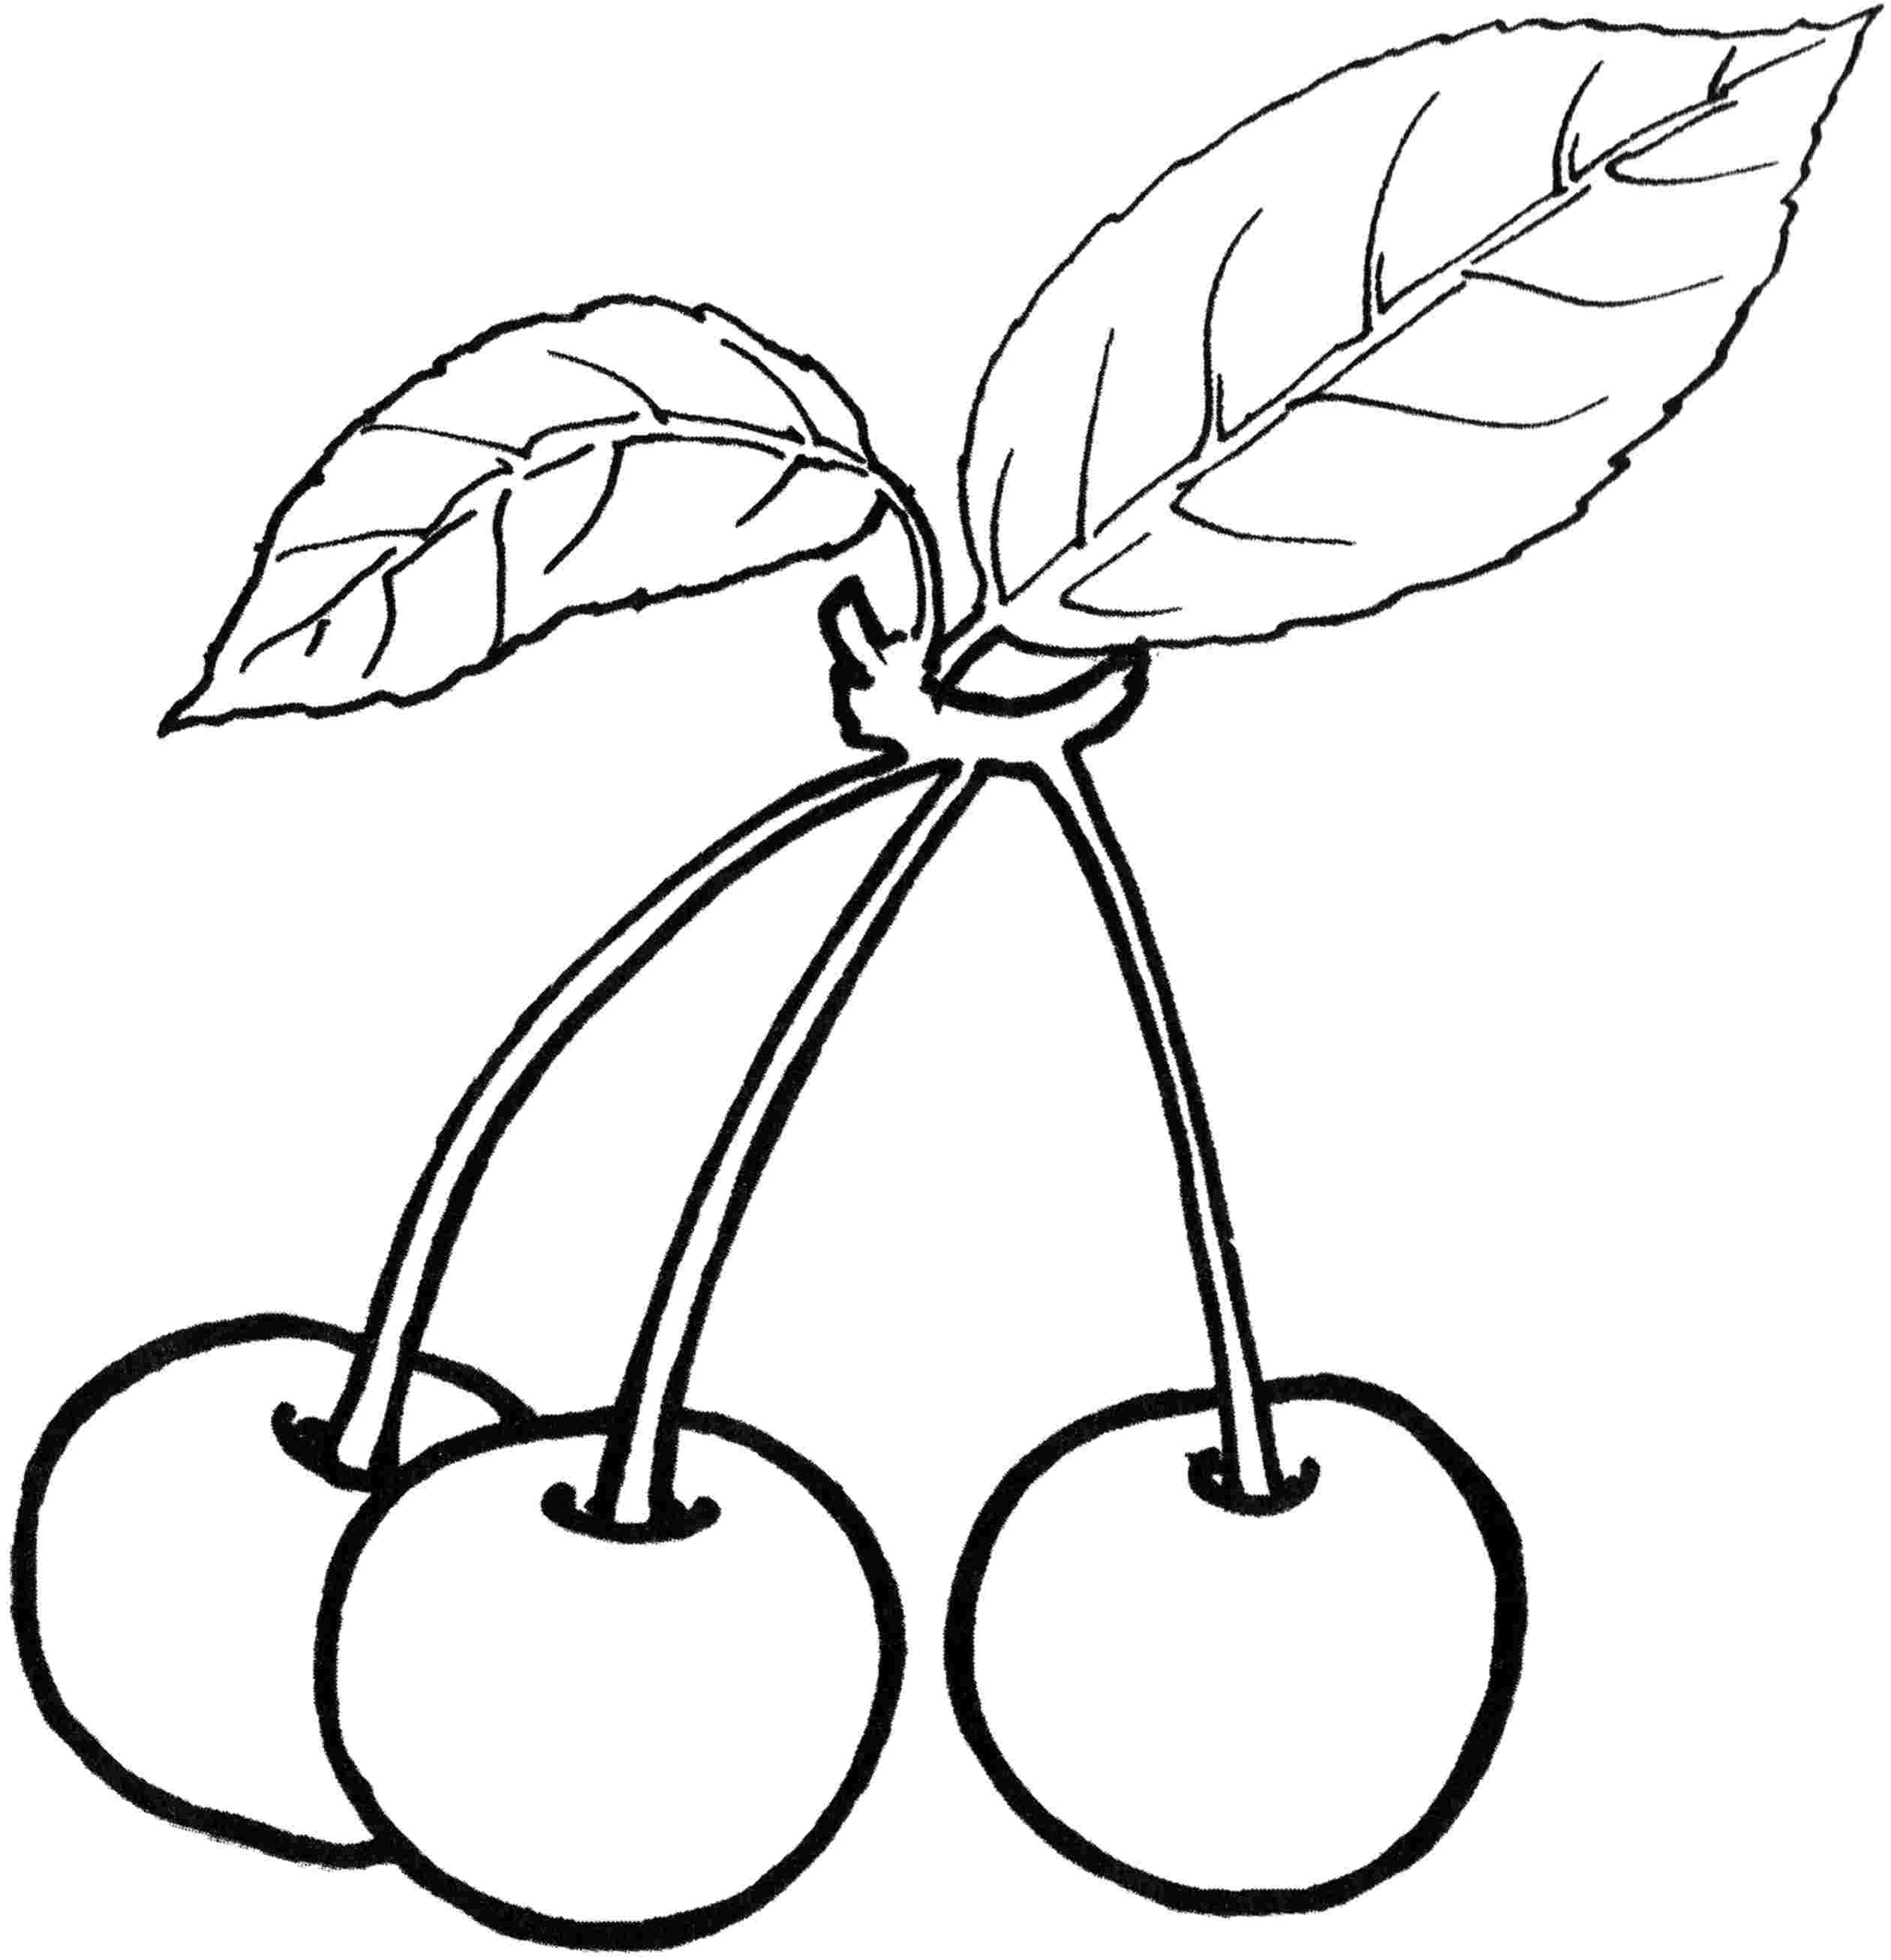 Berries clipart black and white. Unique coloring pages gallery